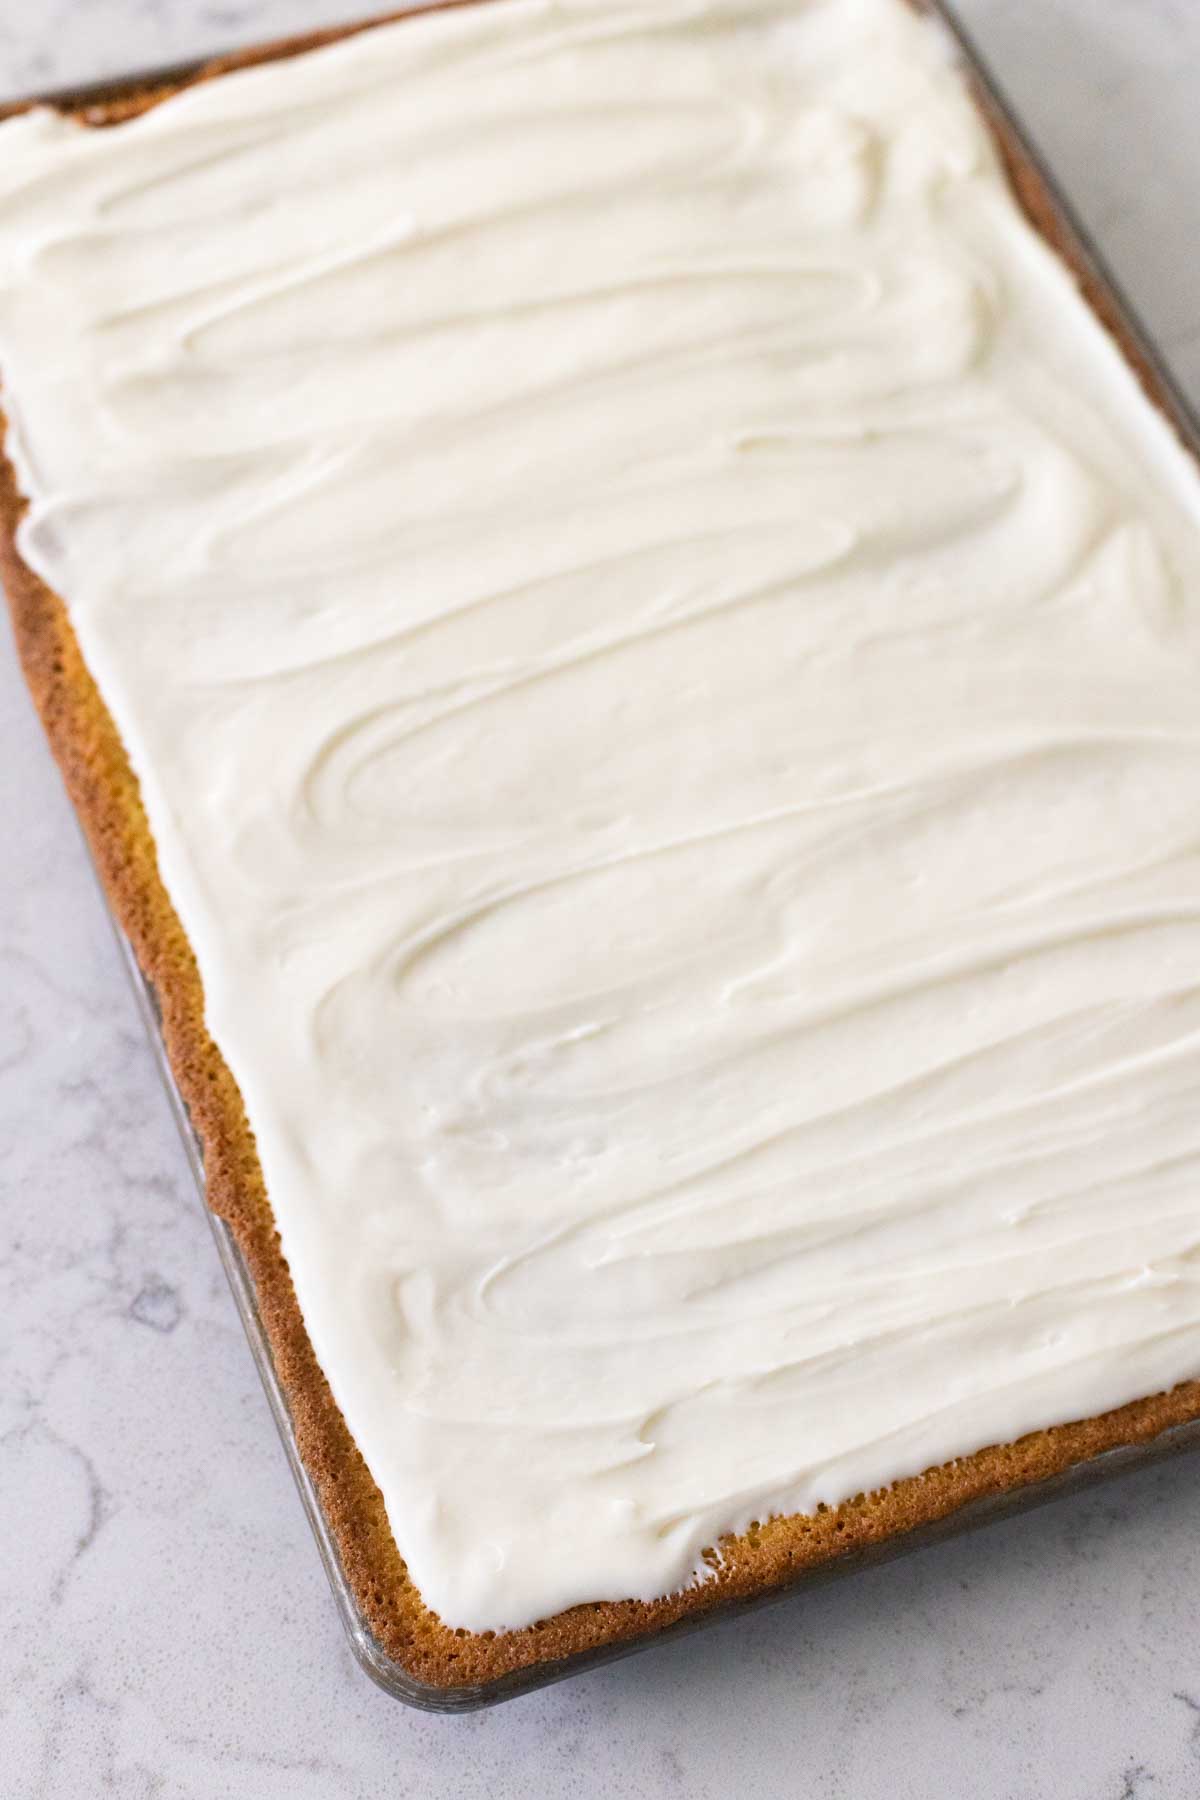 The cake has the almond icing spread evenly over the top. Pretty swirl marks cover the top of the cake.